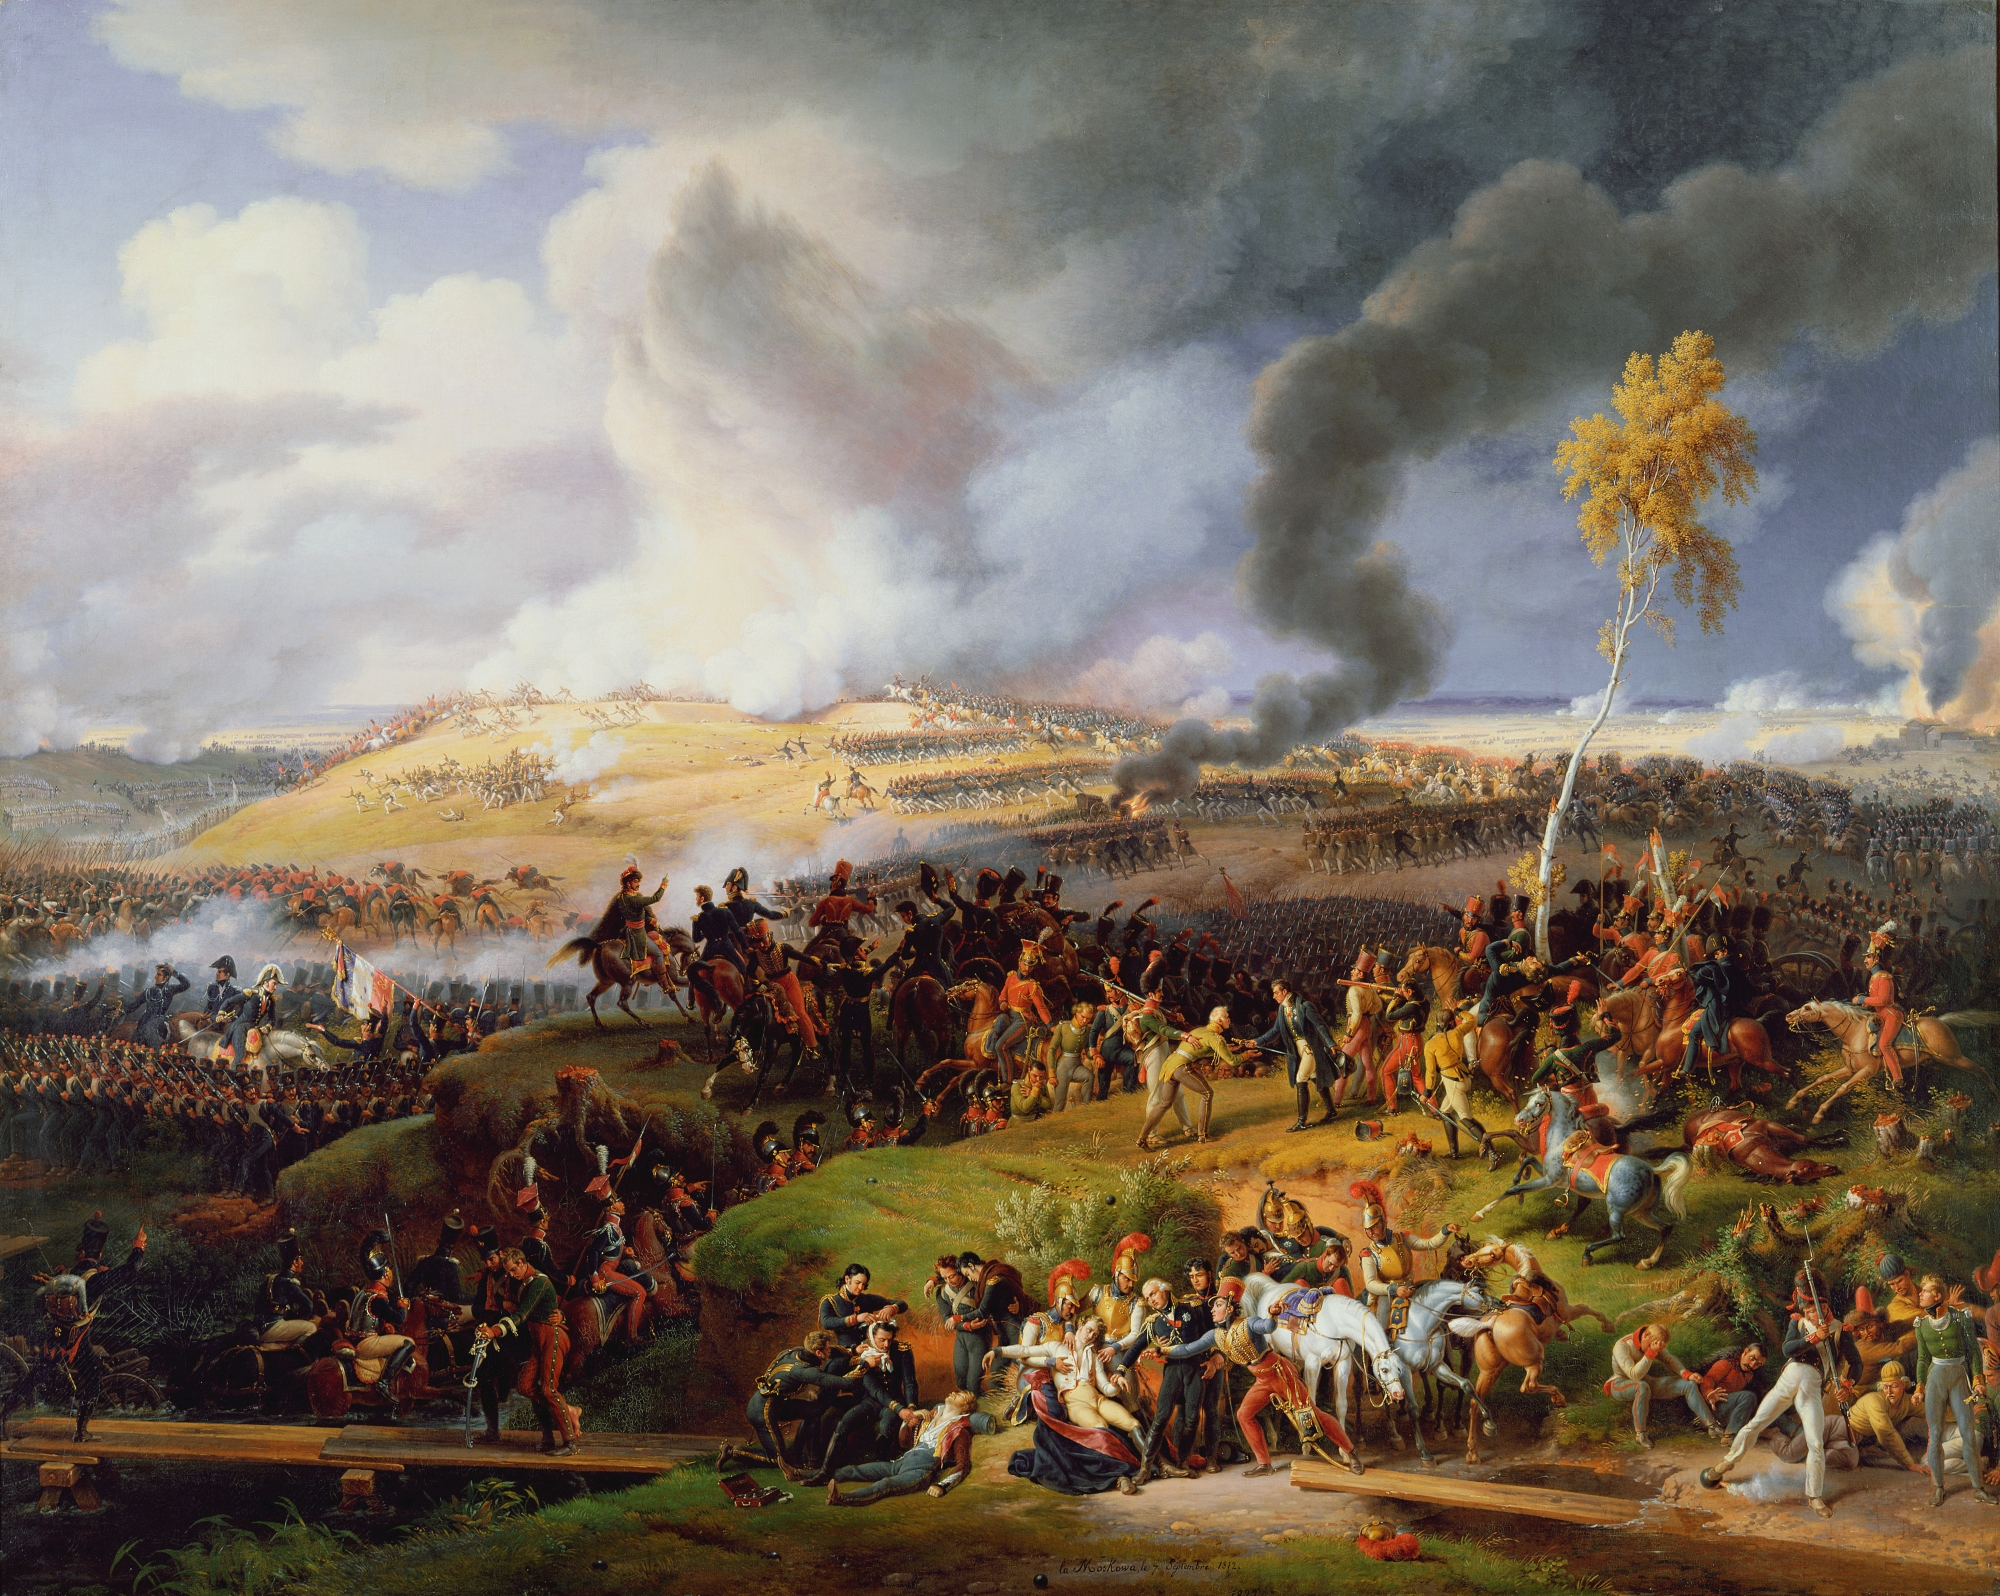 A painting of the Battle of Borodino during the invasion of Russia by France in the Napoleonic Wars